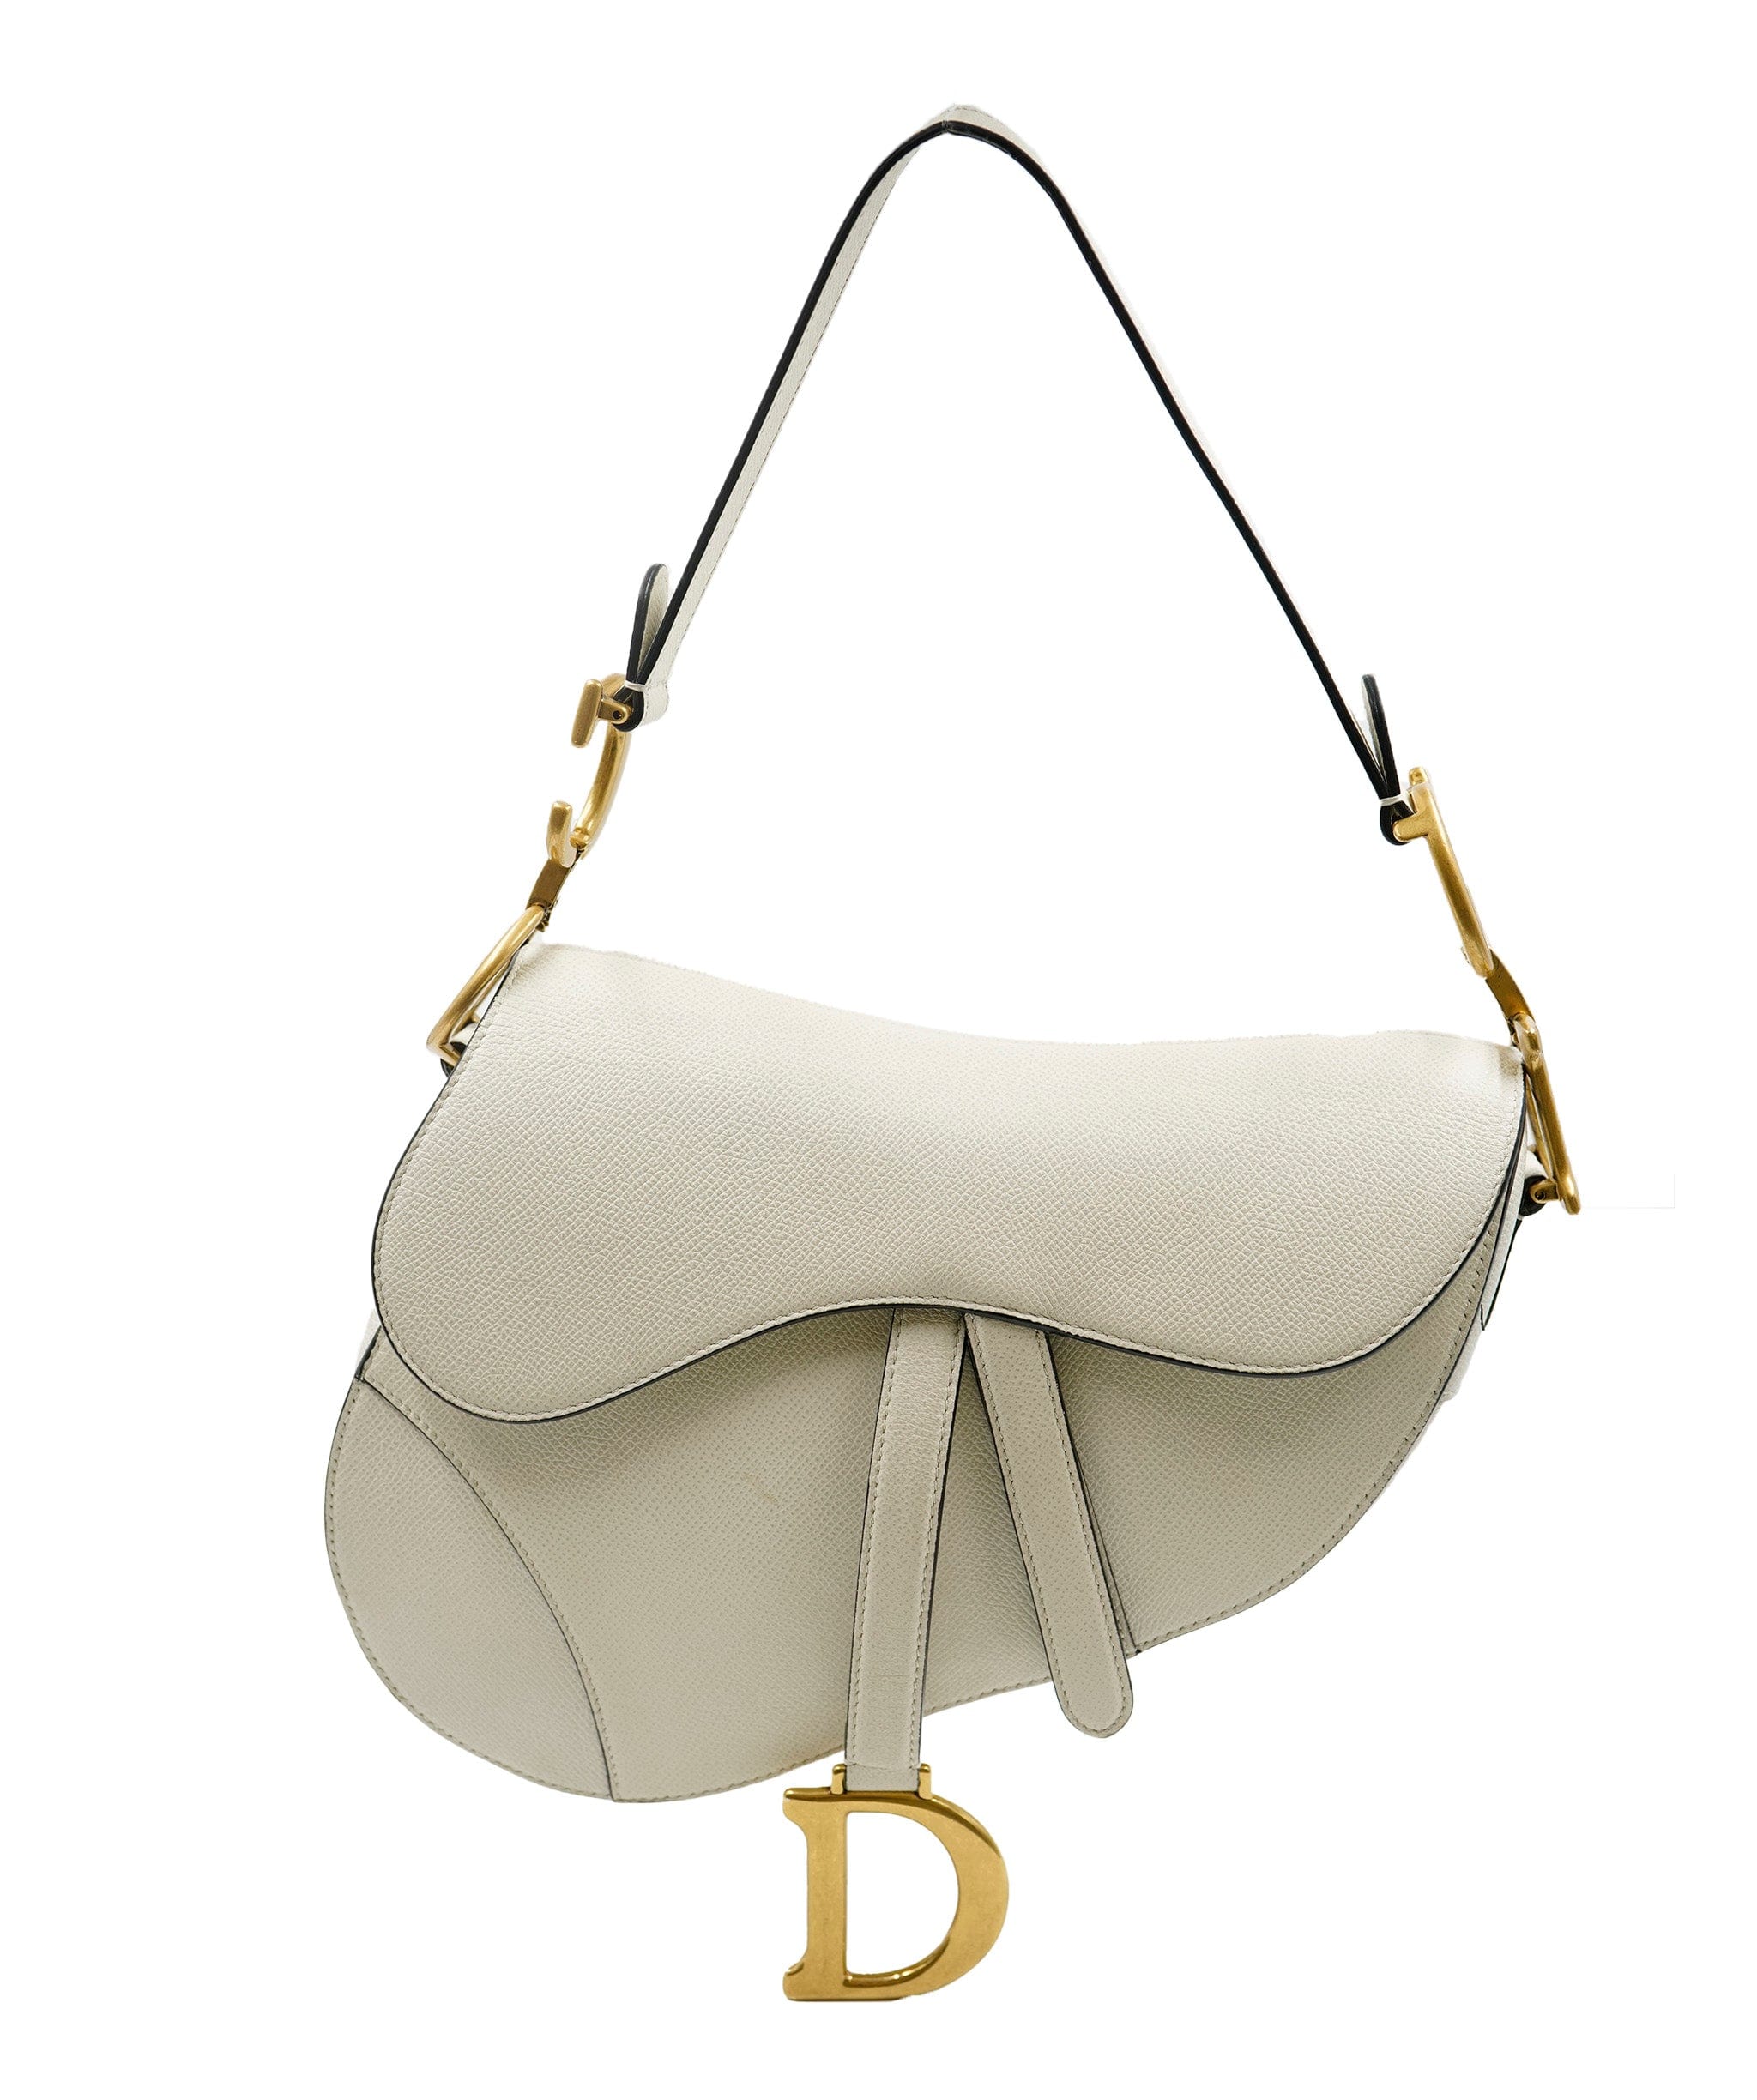 Dior White leather Saddle Bag with GHW - RJC1608 – LuxuryPromise